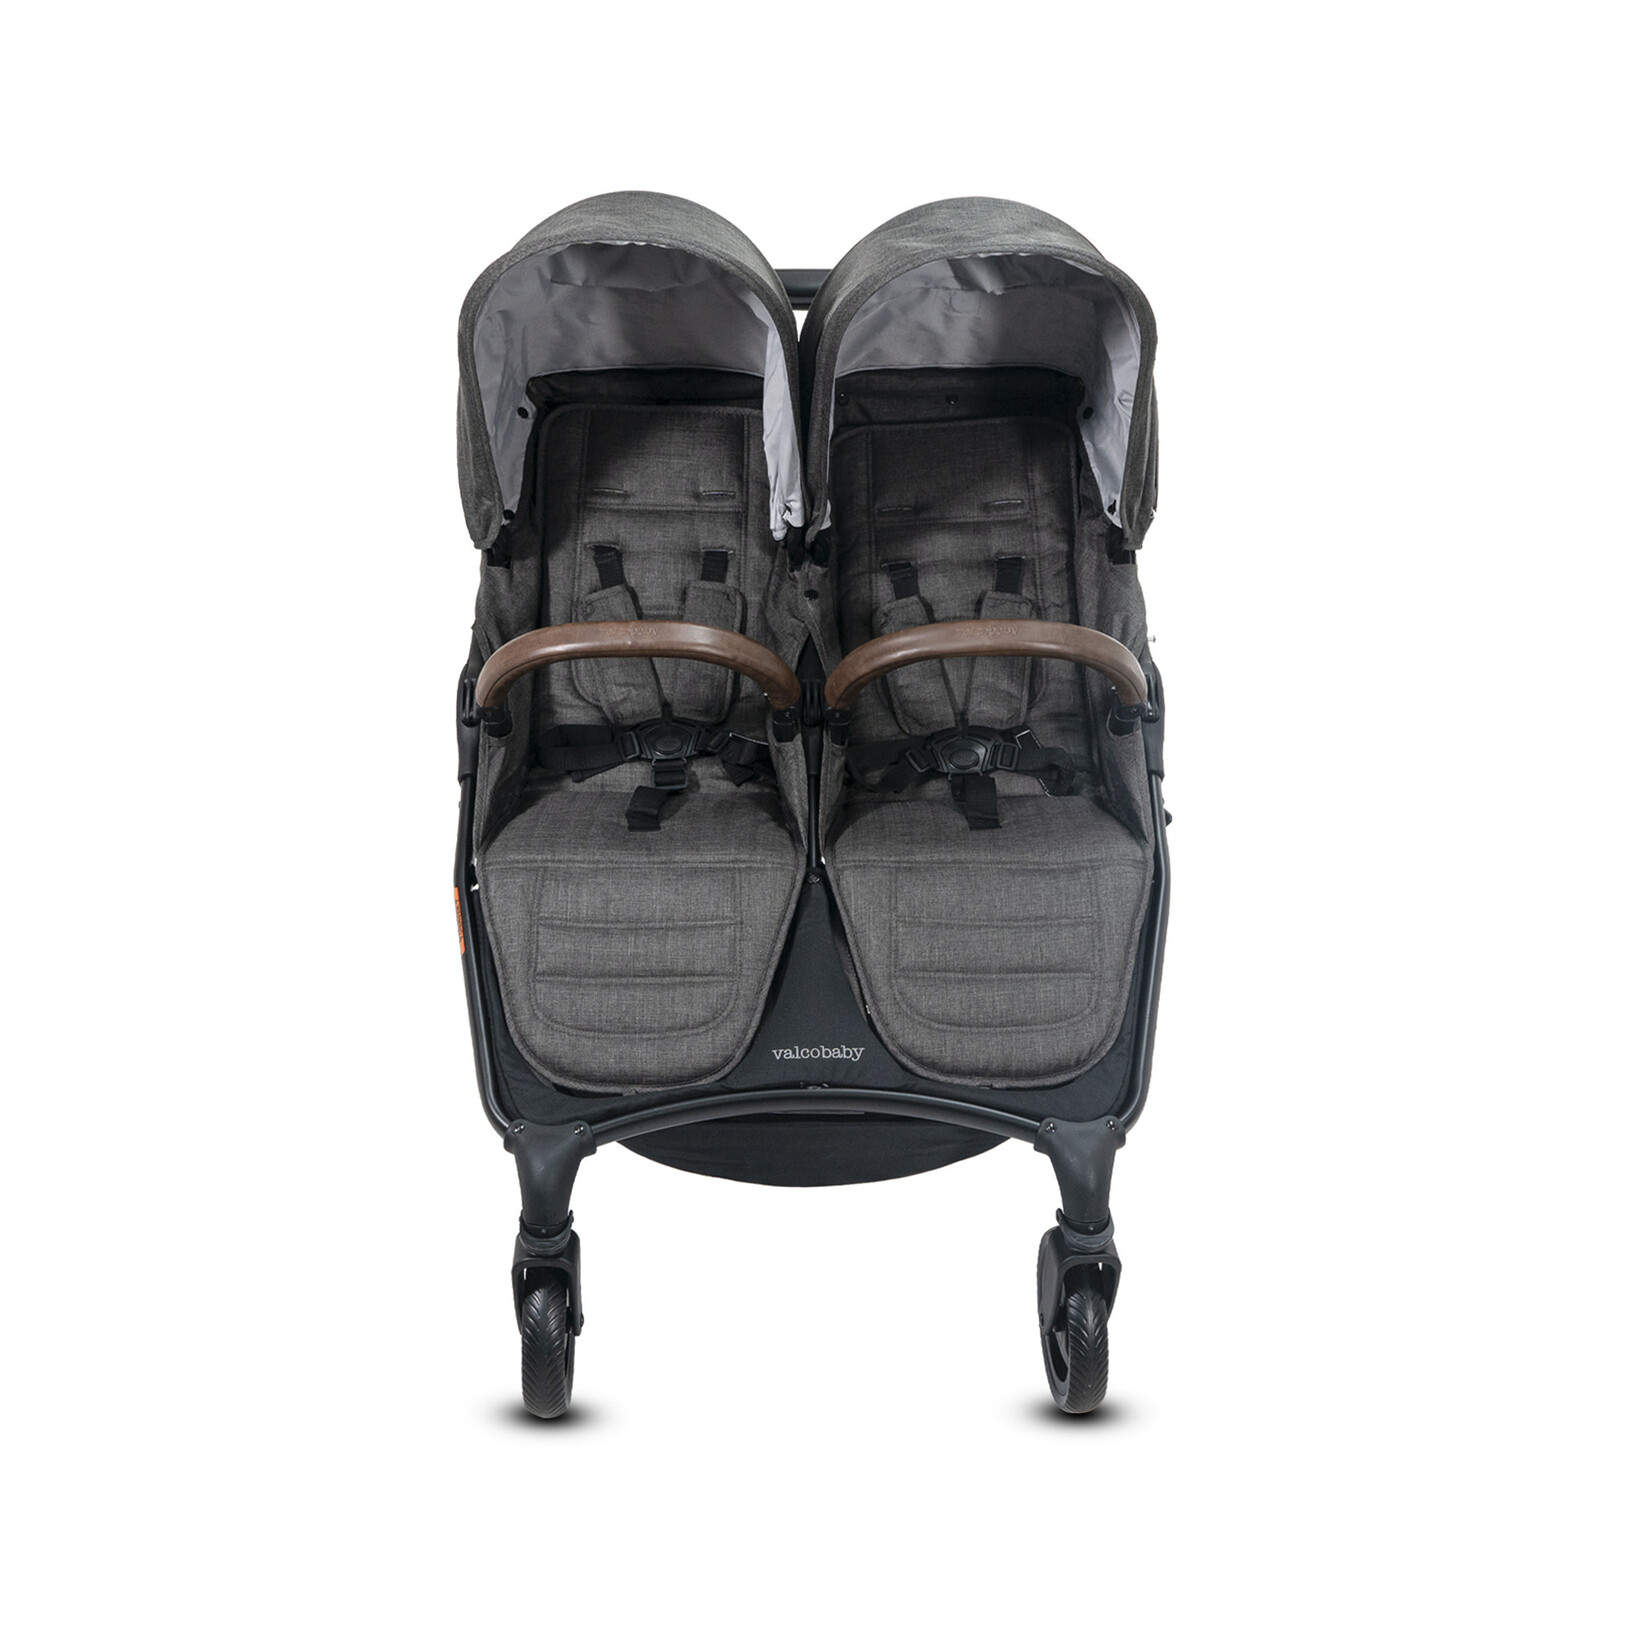 Valco Baby Trend Duo-Charcoal +Bonus Gift Total Value $114.85